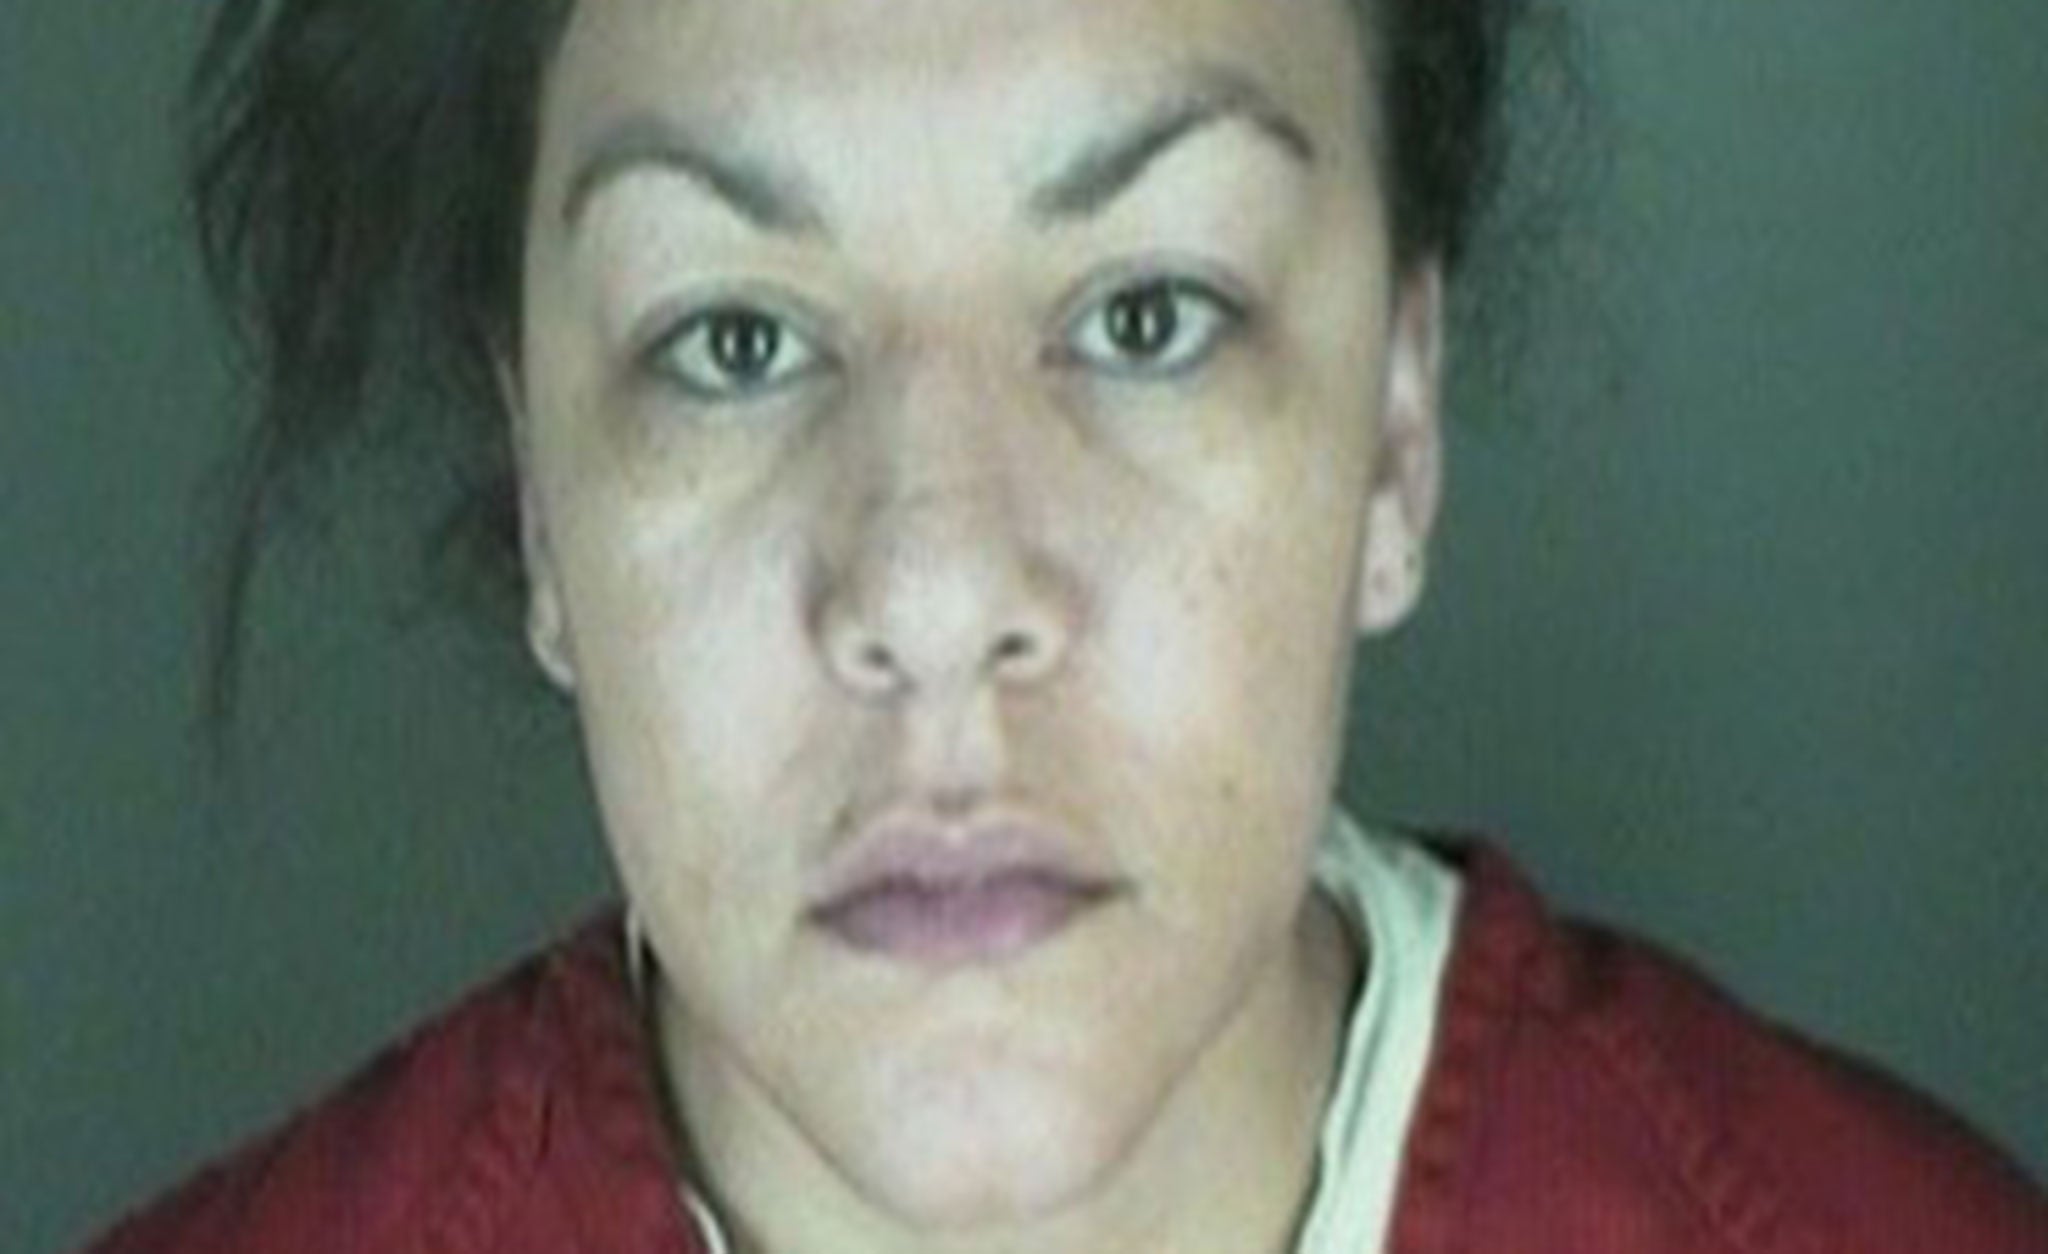 Catrece Lane has been charged in connection with the stabbing of a pregnant Colorado woman who had her baby cut from her womb after answering a Craigslist ad for baby clothes